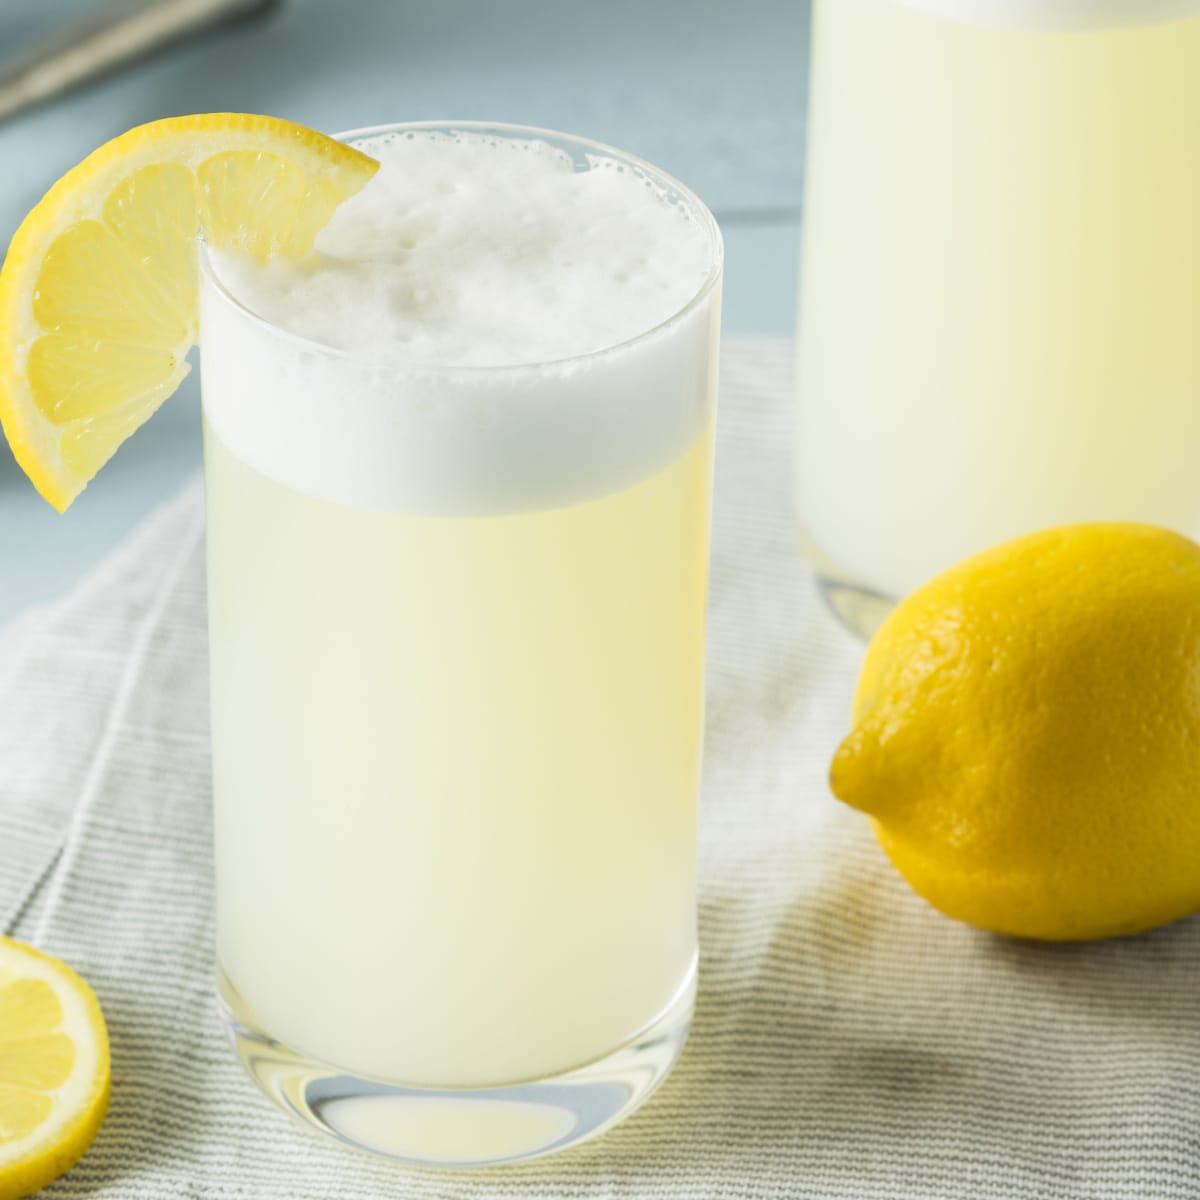 Fresh lemon and glass of bubbly gin fizz on a table garnished with half lemon wheel slice, with a bright yellow lemon on side